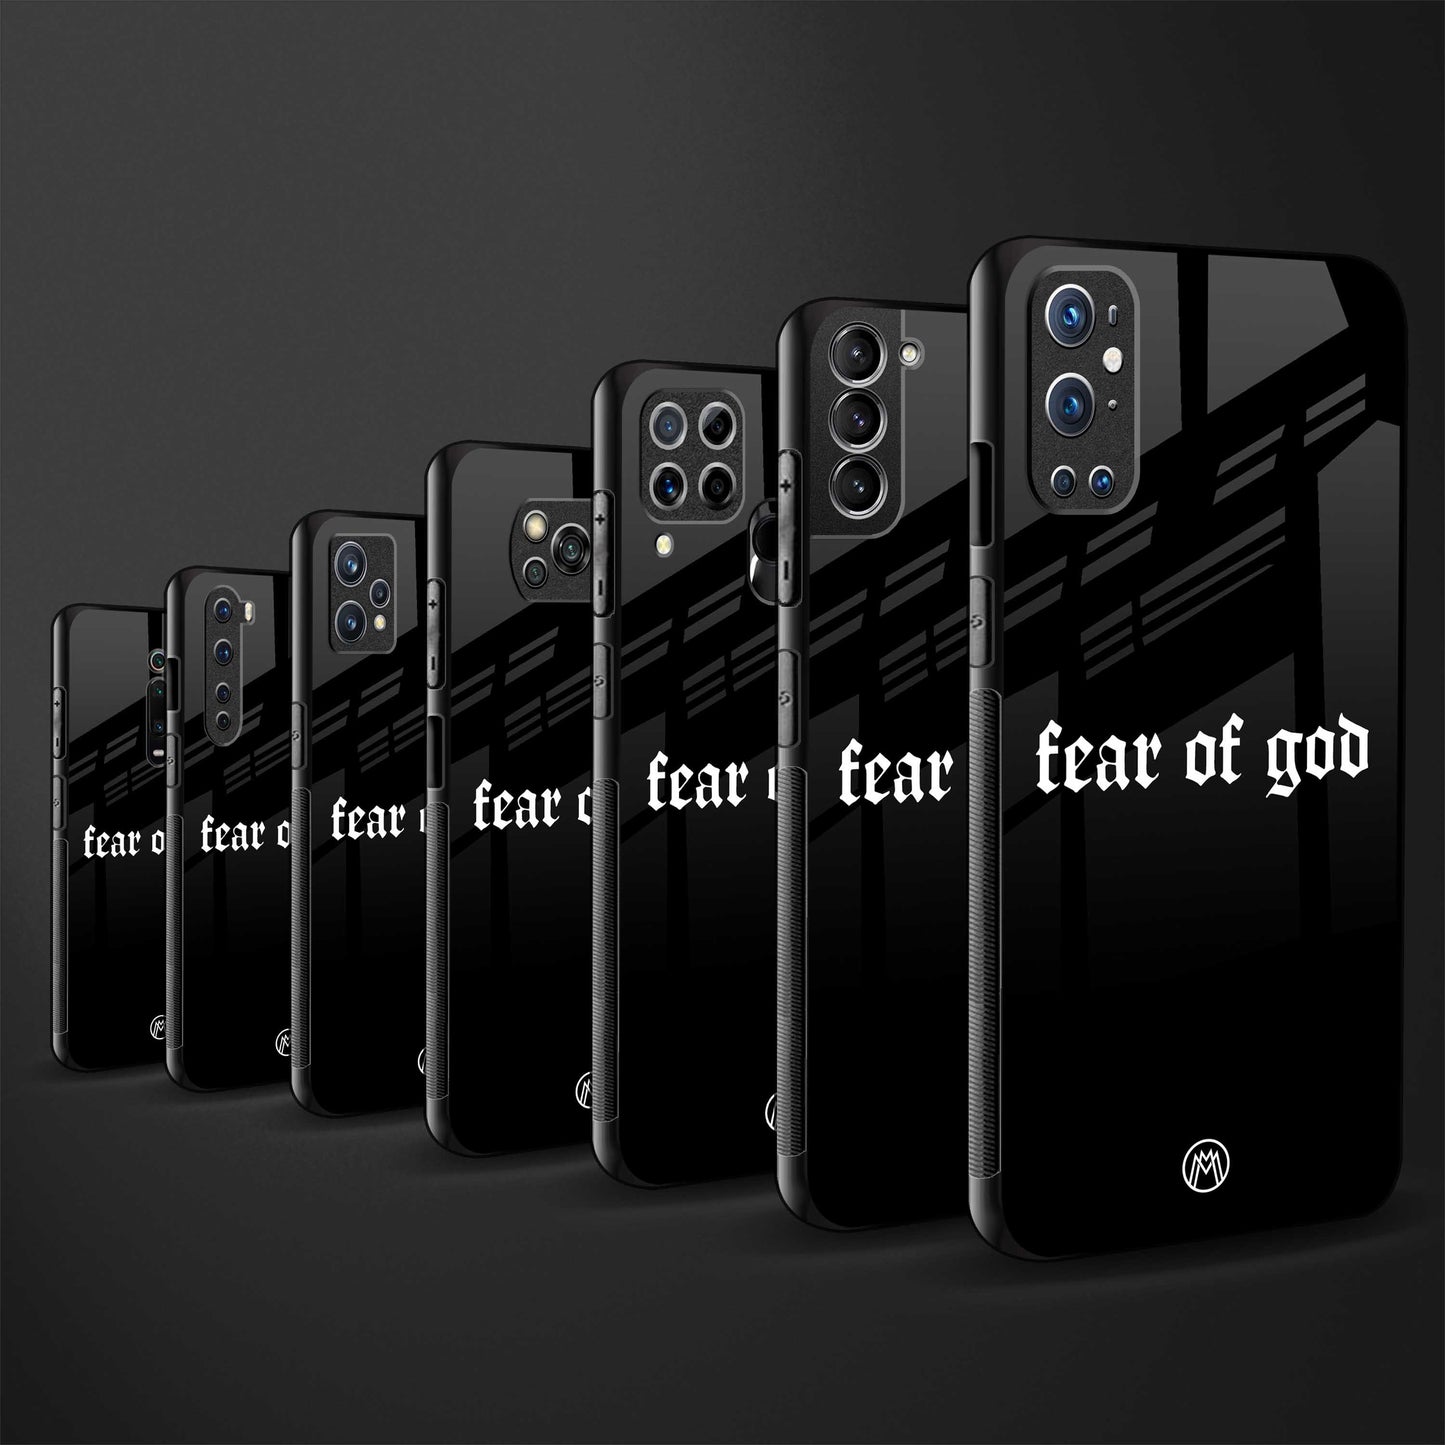 fear of god phone cover for realme 5i